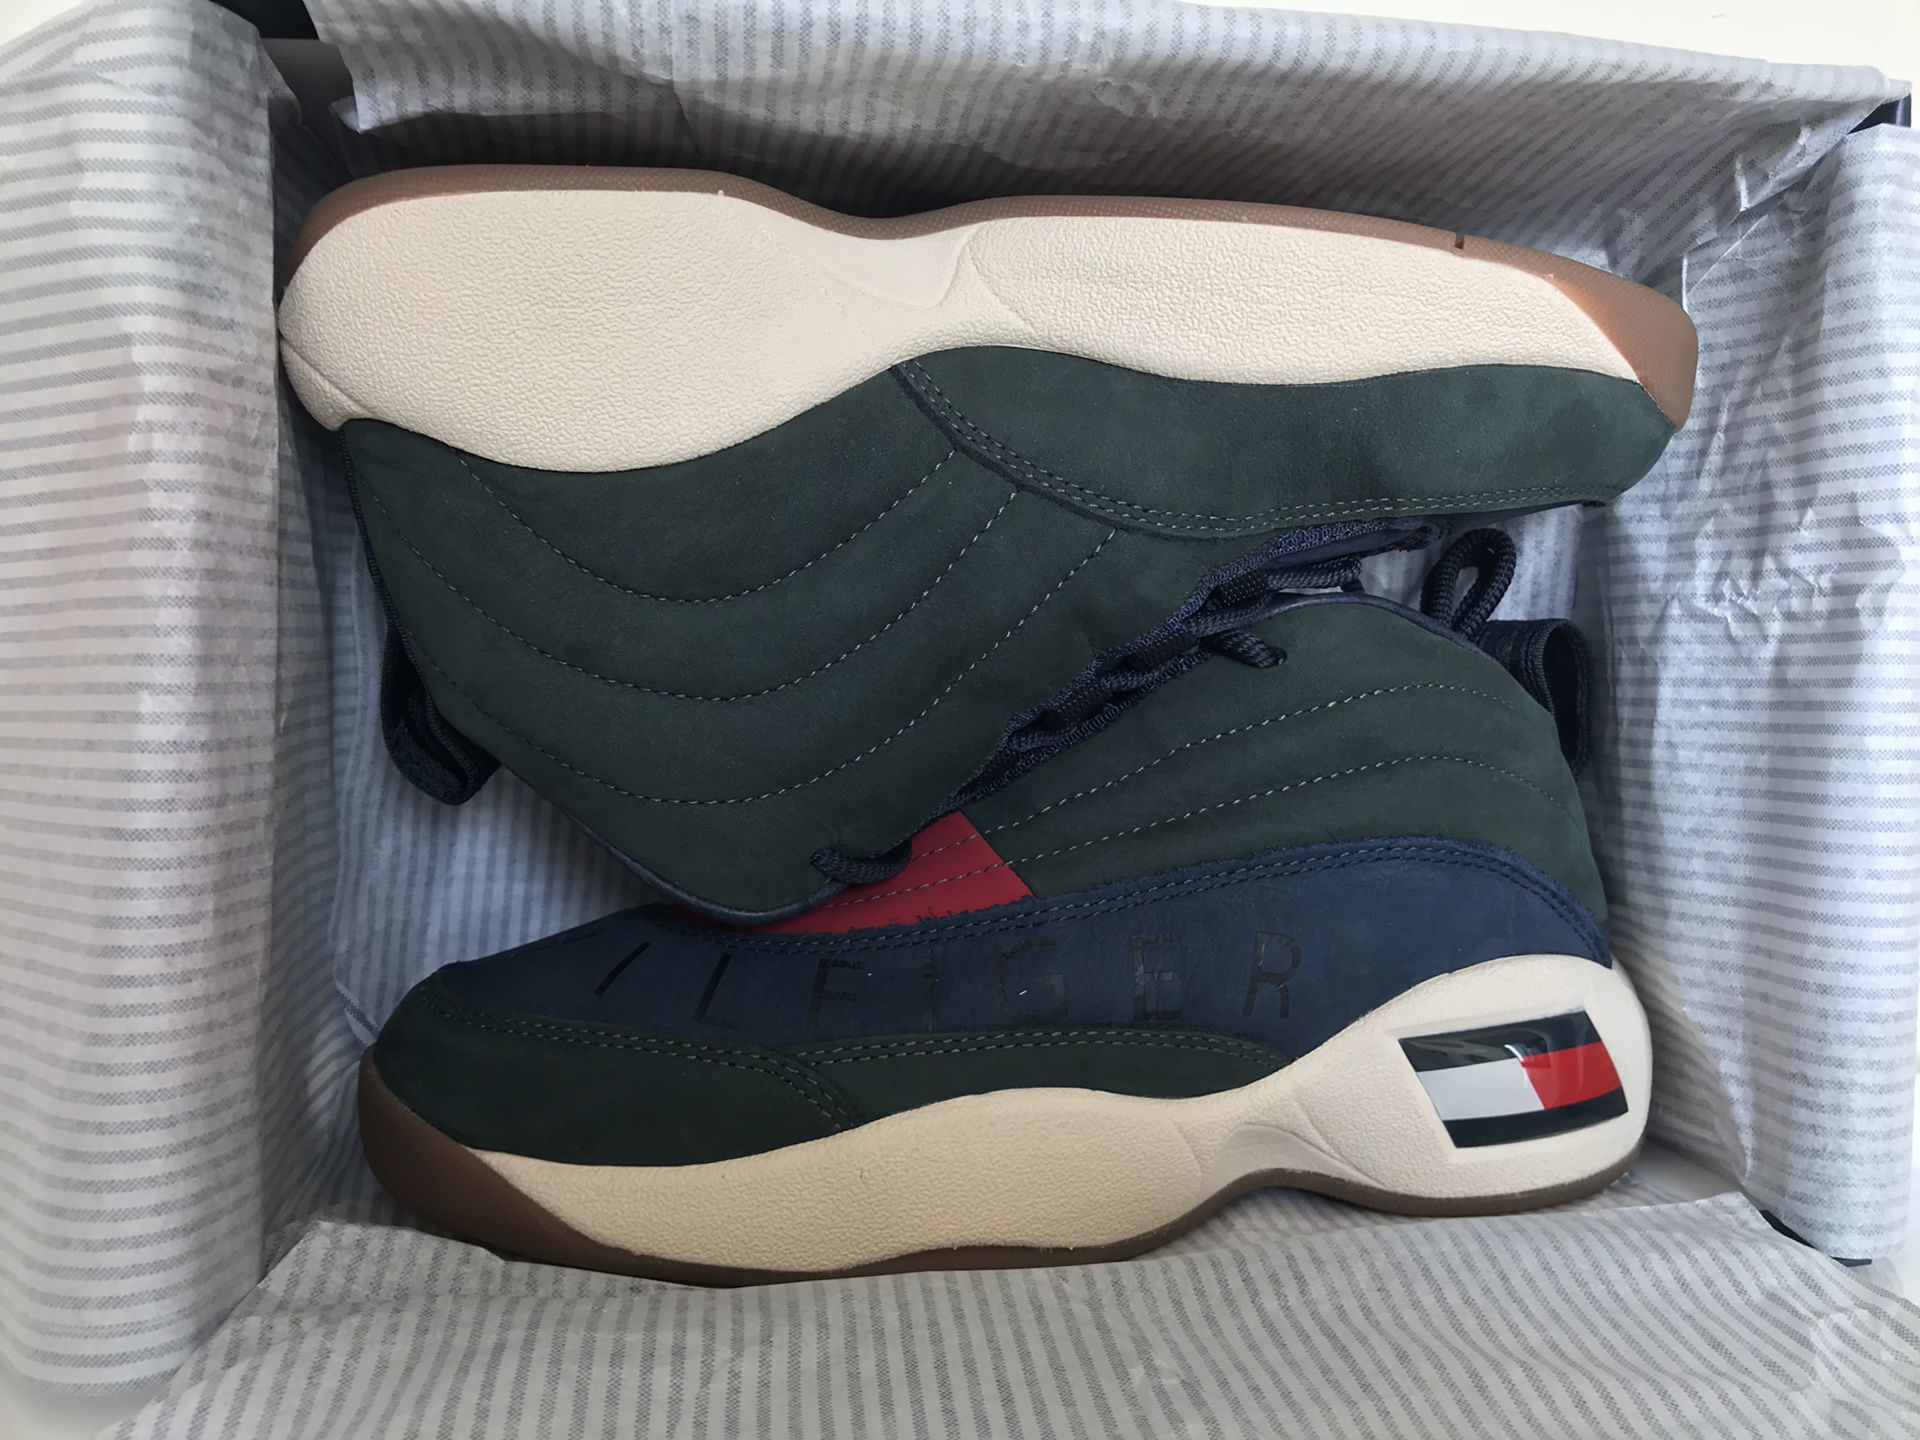 KITH X TOMMY HILFIGER LUX BASKETBALL SNEAKER SIZE 7